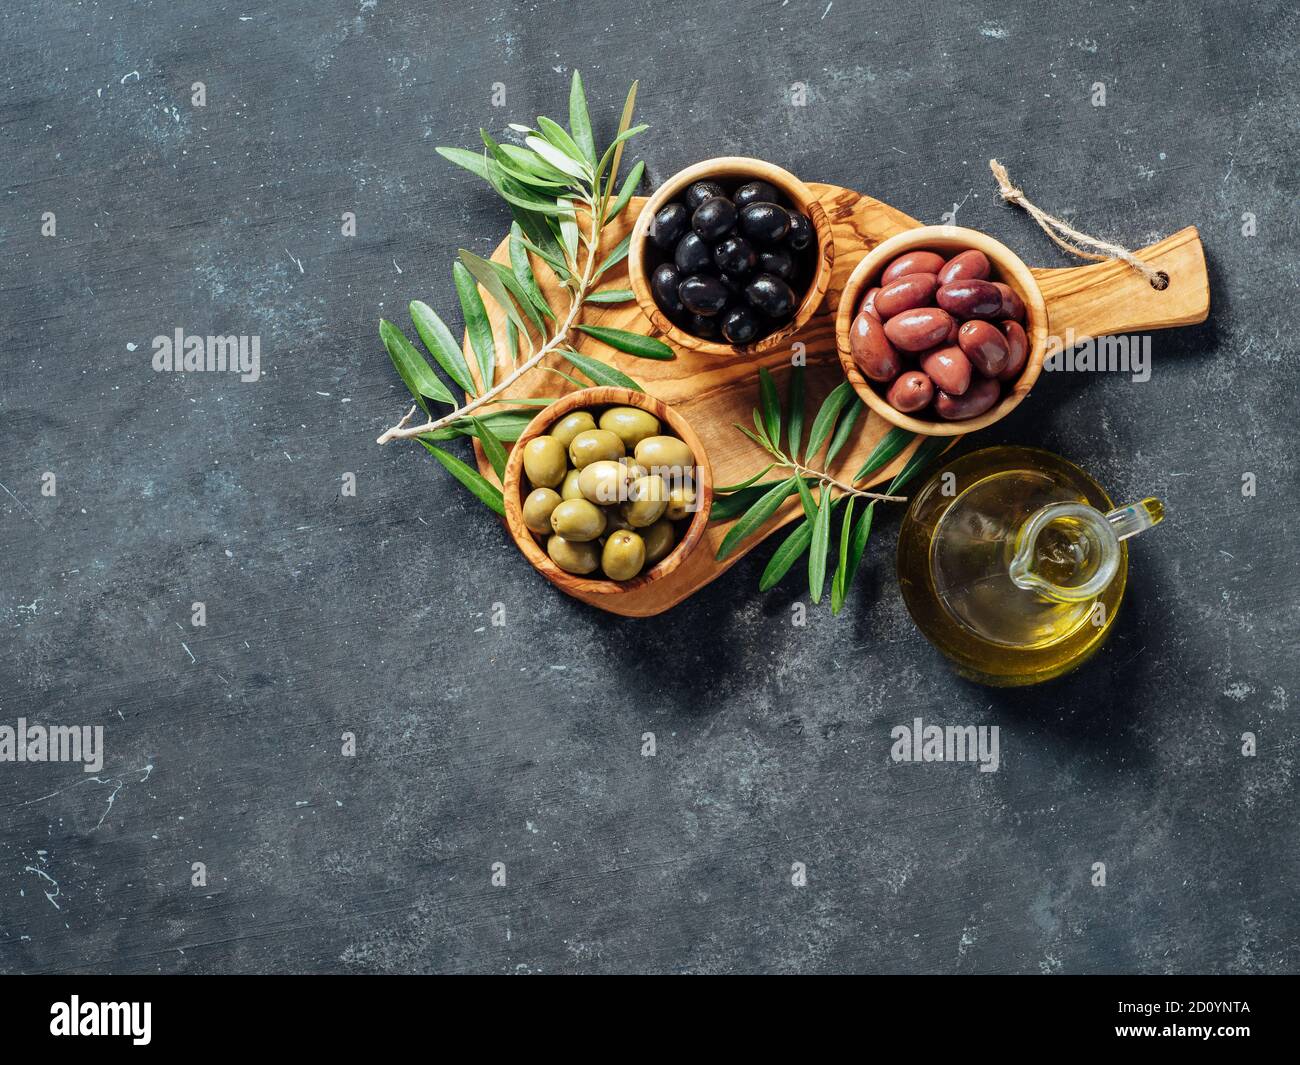 Set of green, black and red or pink olives and olive oil on gray background. Different types of olives in olive wooden bowls and olive oil over wooden cutting board. Copy space. Top view or flat lay Stock Photo